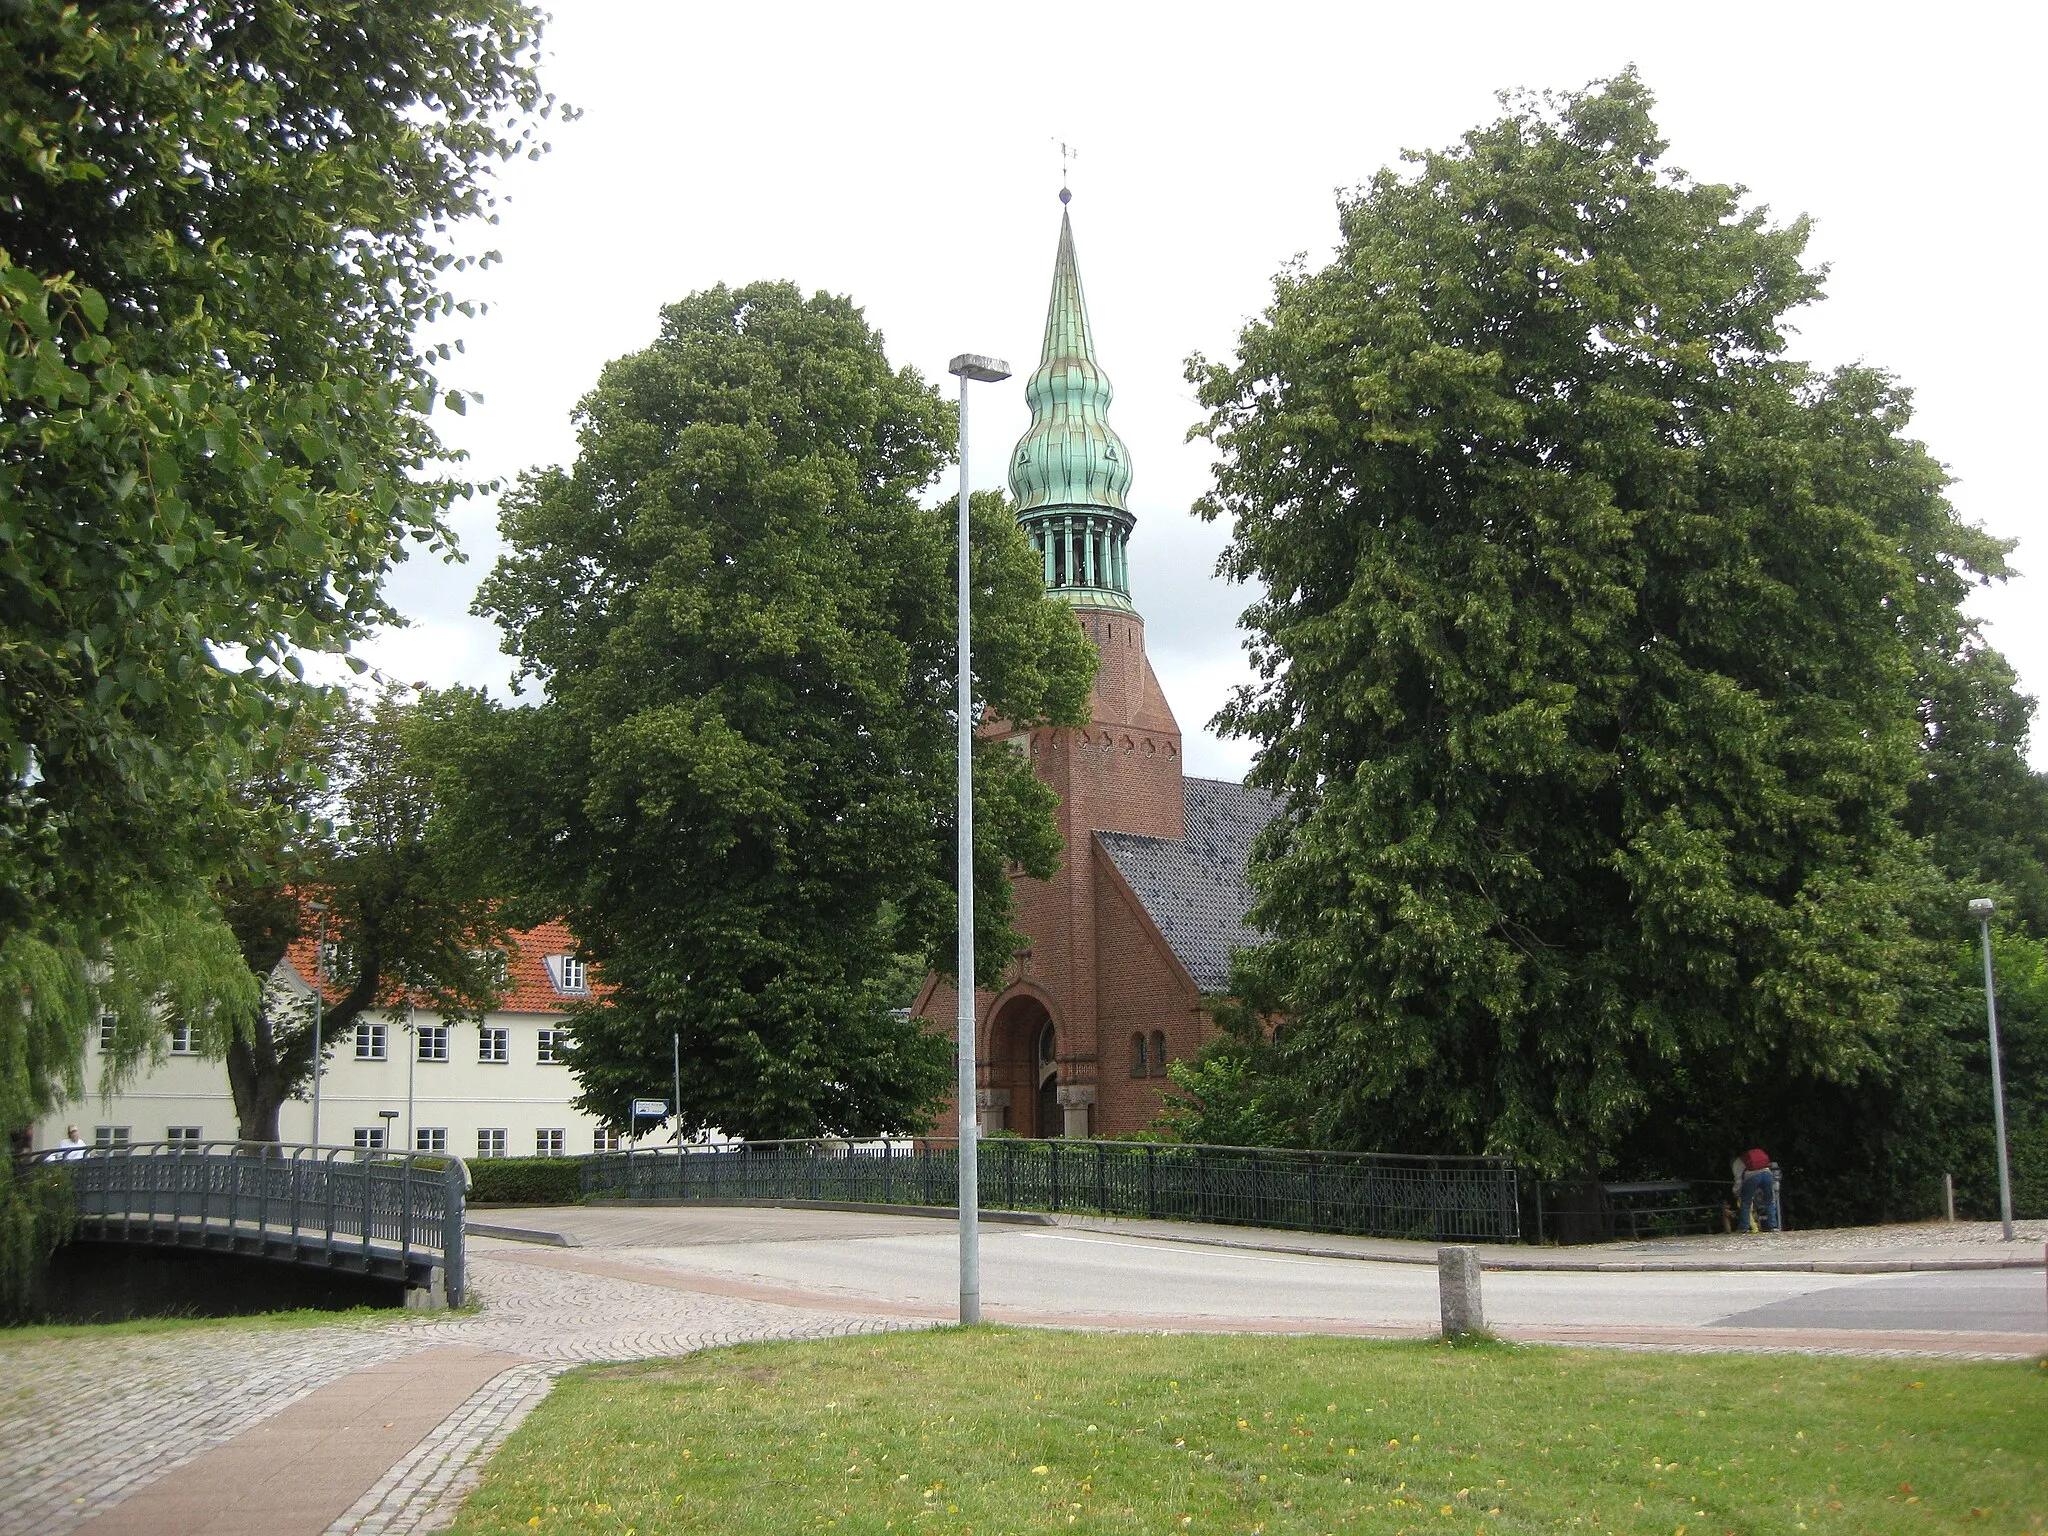 Photo showing: View at the church in the town "Frederiksværk". The town is located in North Zealand, east Denmark.